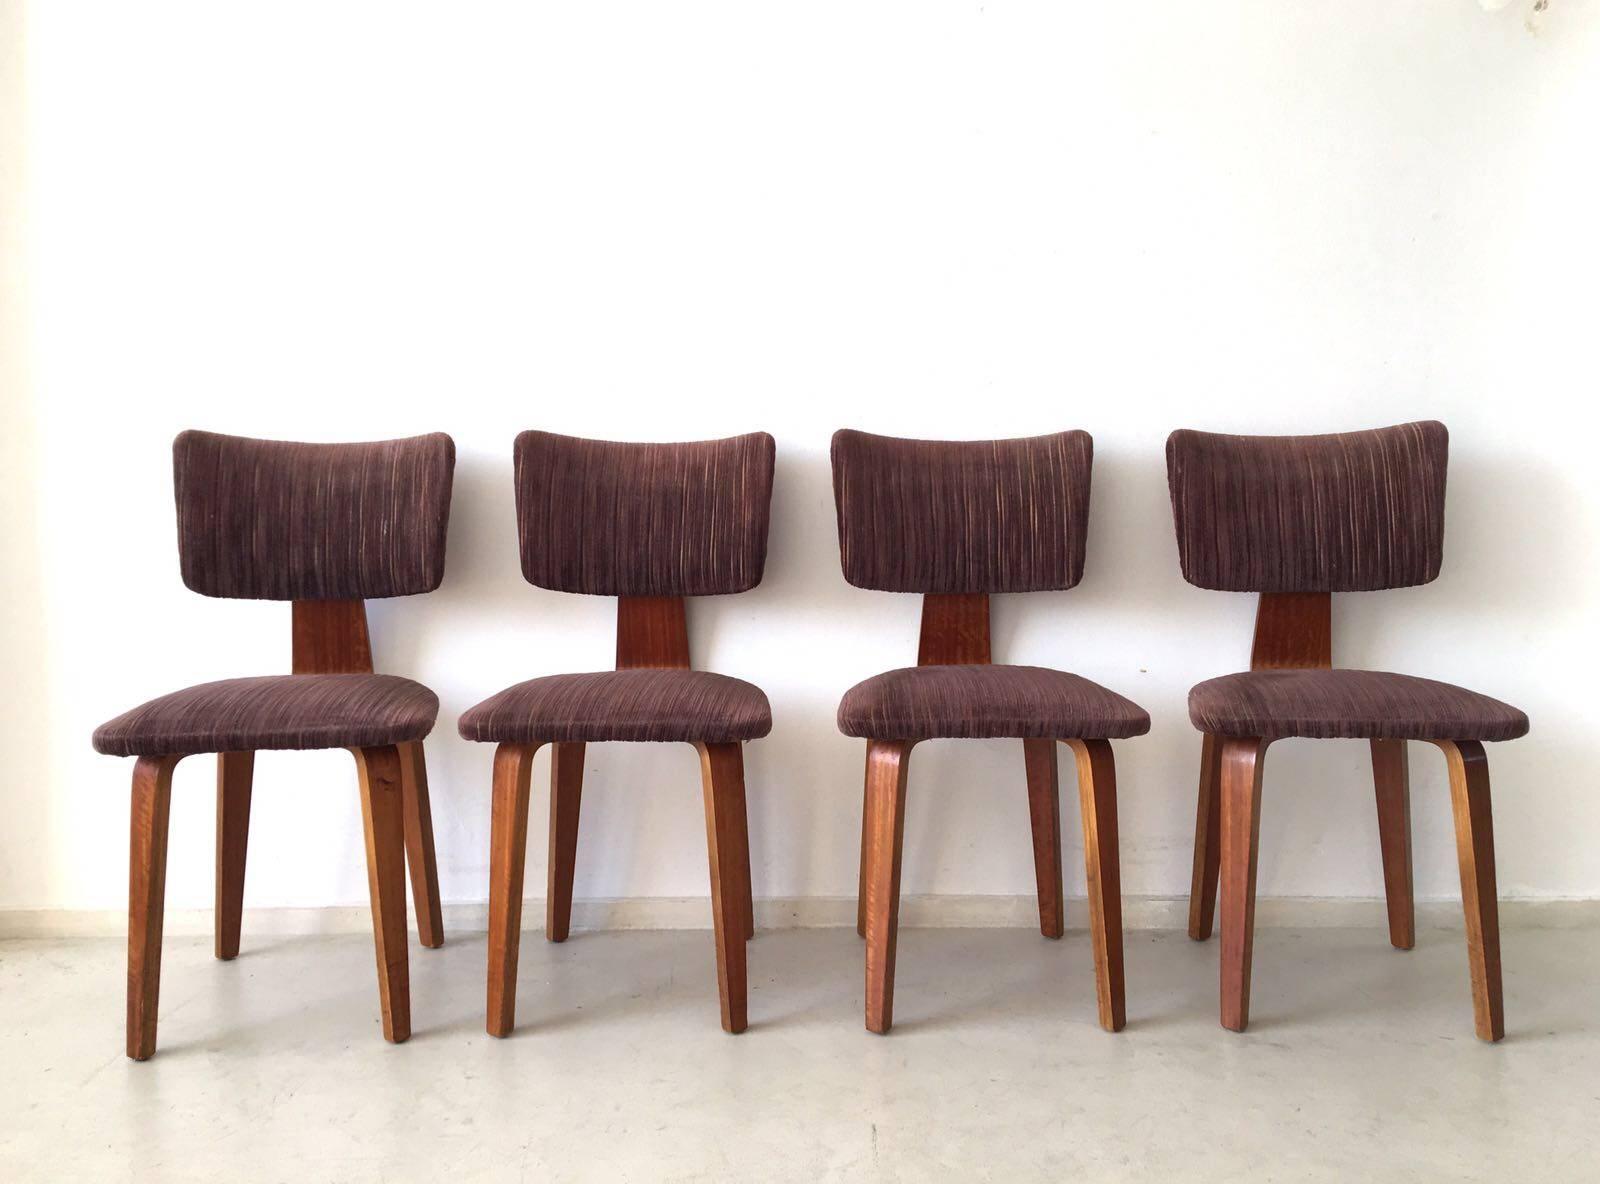 A legendary Dutch design classic, this set of four dining chairs designed by Cor Alons and J.C. Jansen.

The chairs were designed for C. den Boer Meubelfabrieken, Gouda Holland in 1949. They feature a plywood frame fabricated in birch and come